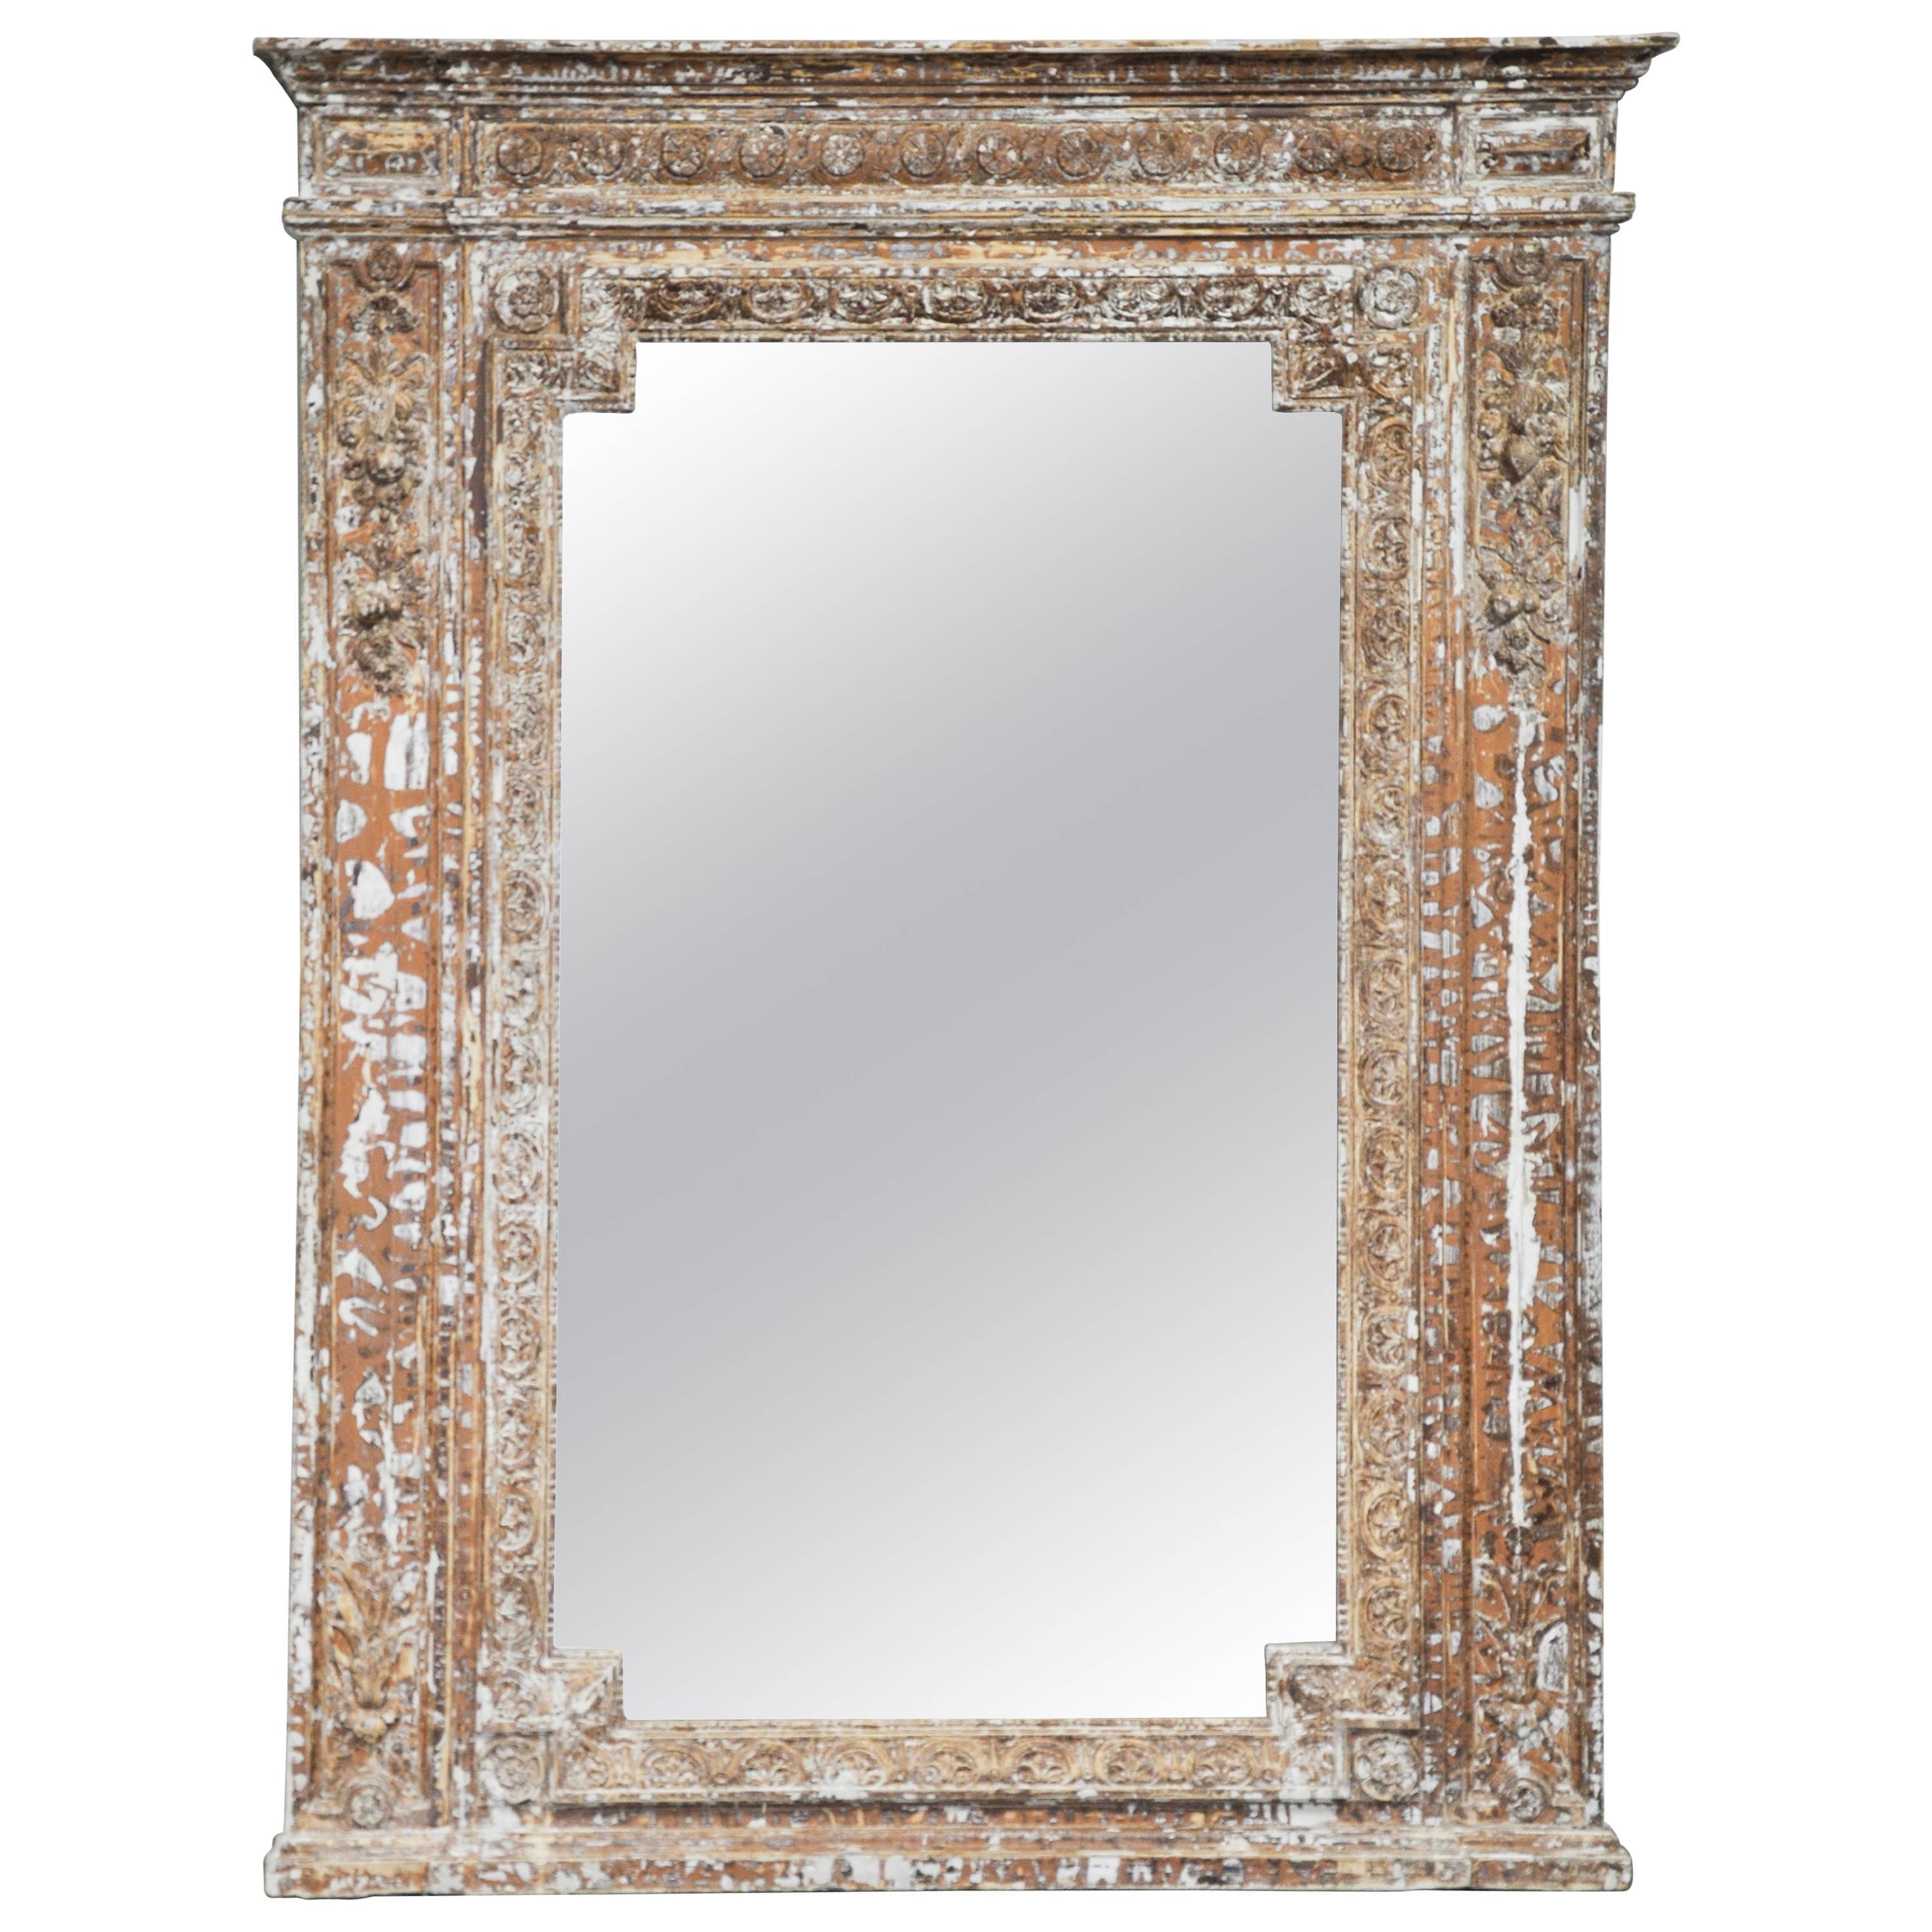 19th Century French Carved Wood Mirror with Stripped Paint Finish